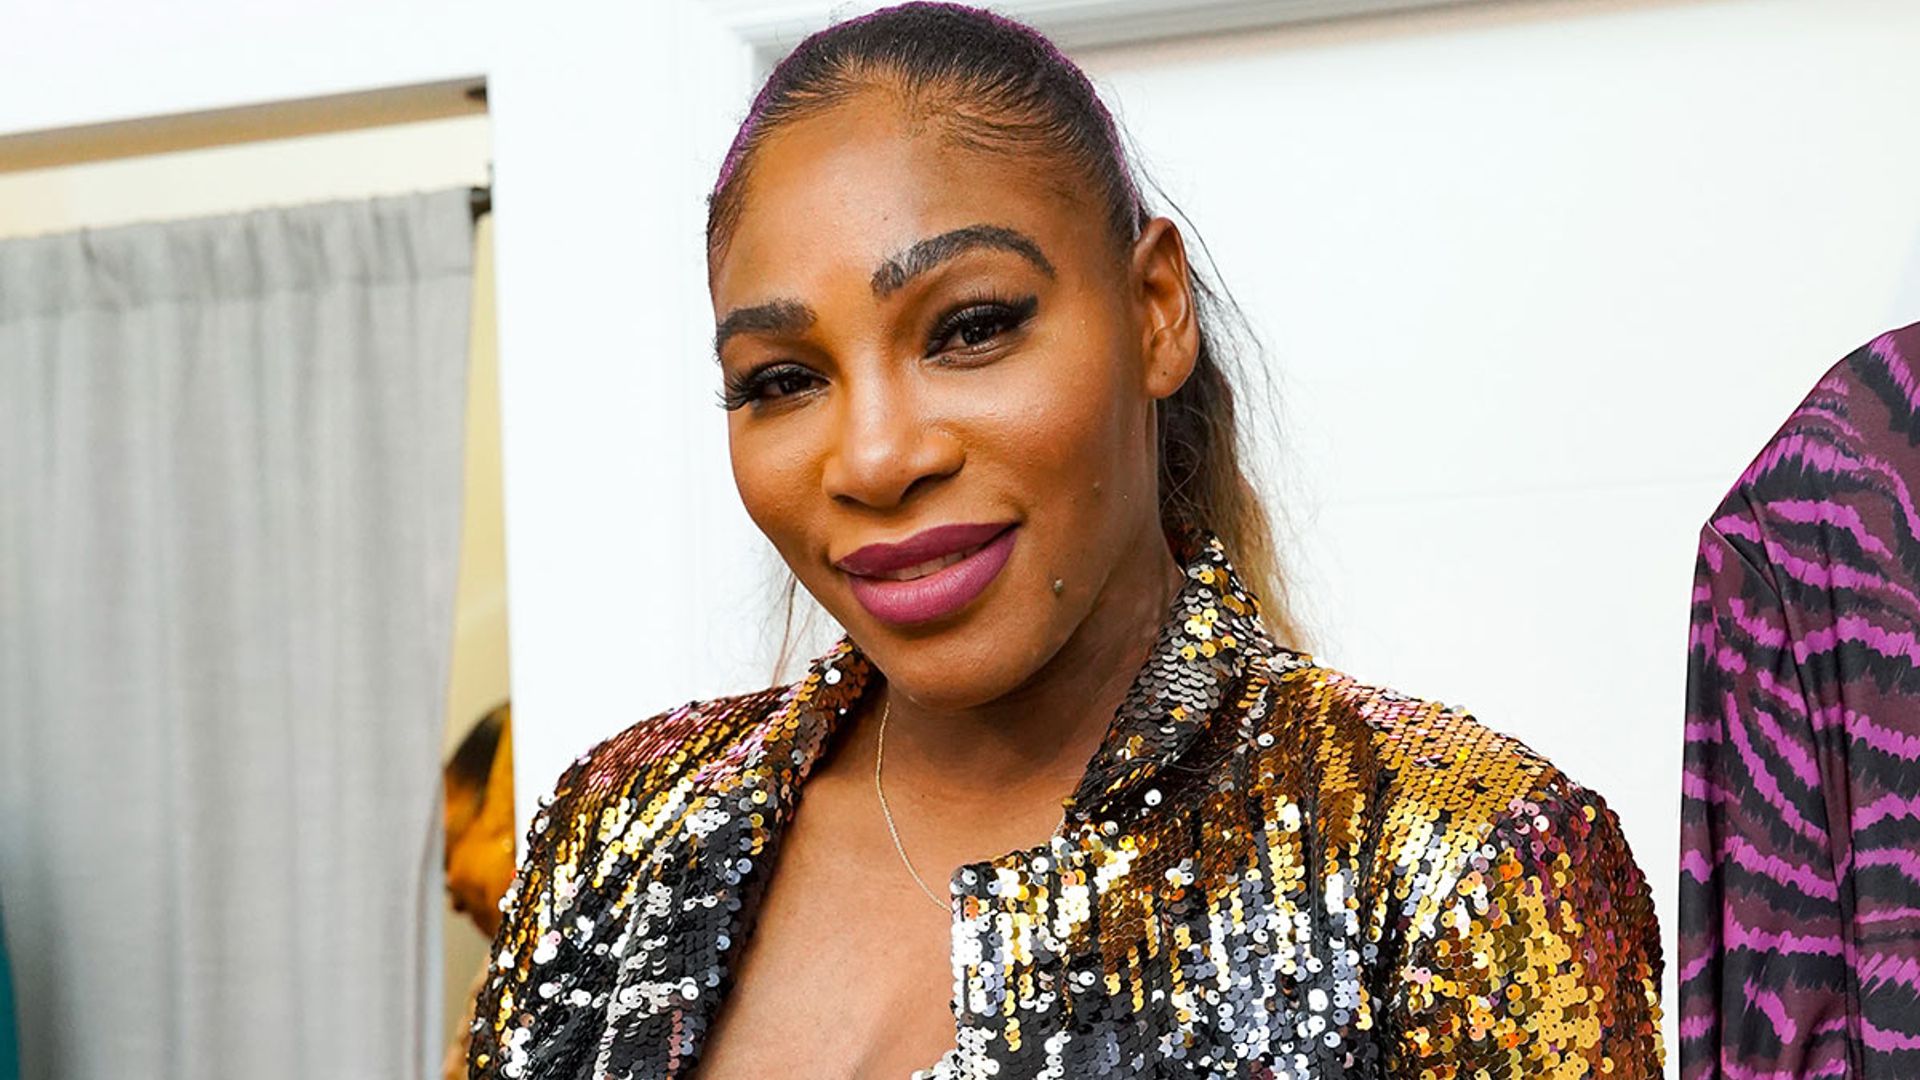 Serena Williams stuns fans in show-stopping mini-dress – and she looks phenomenal